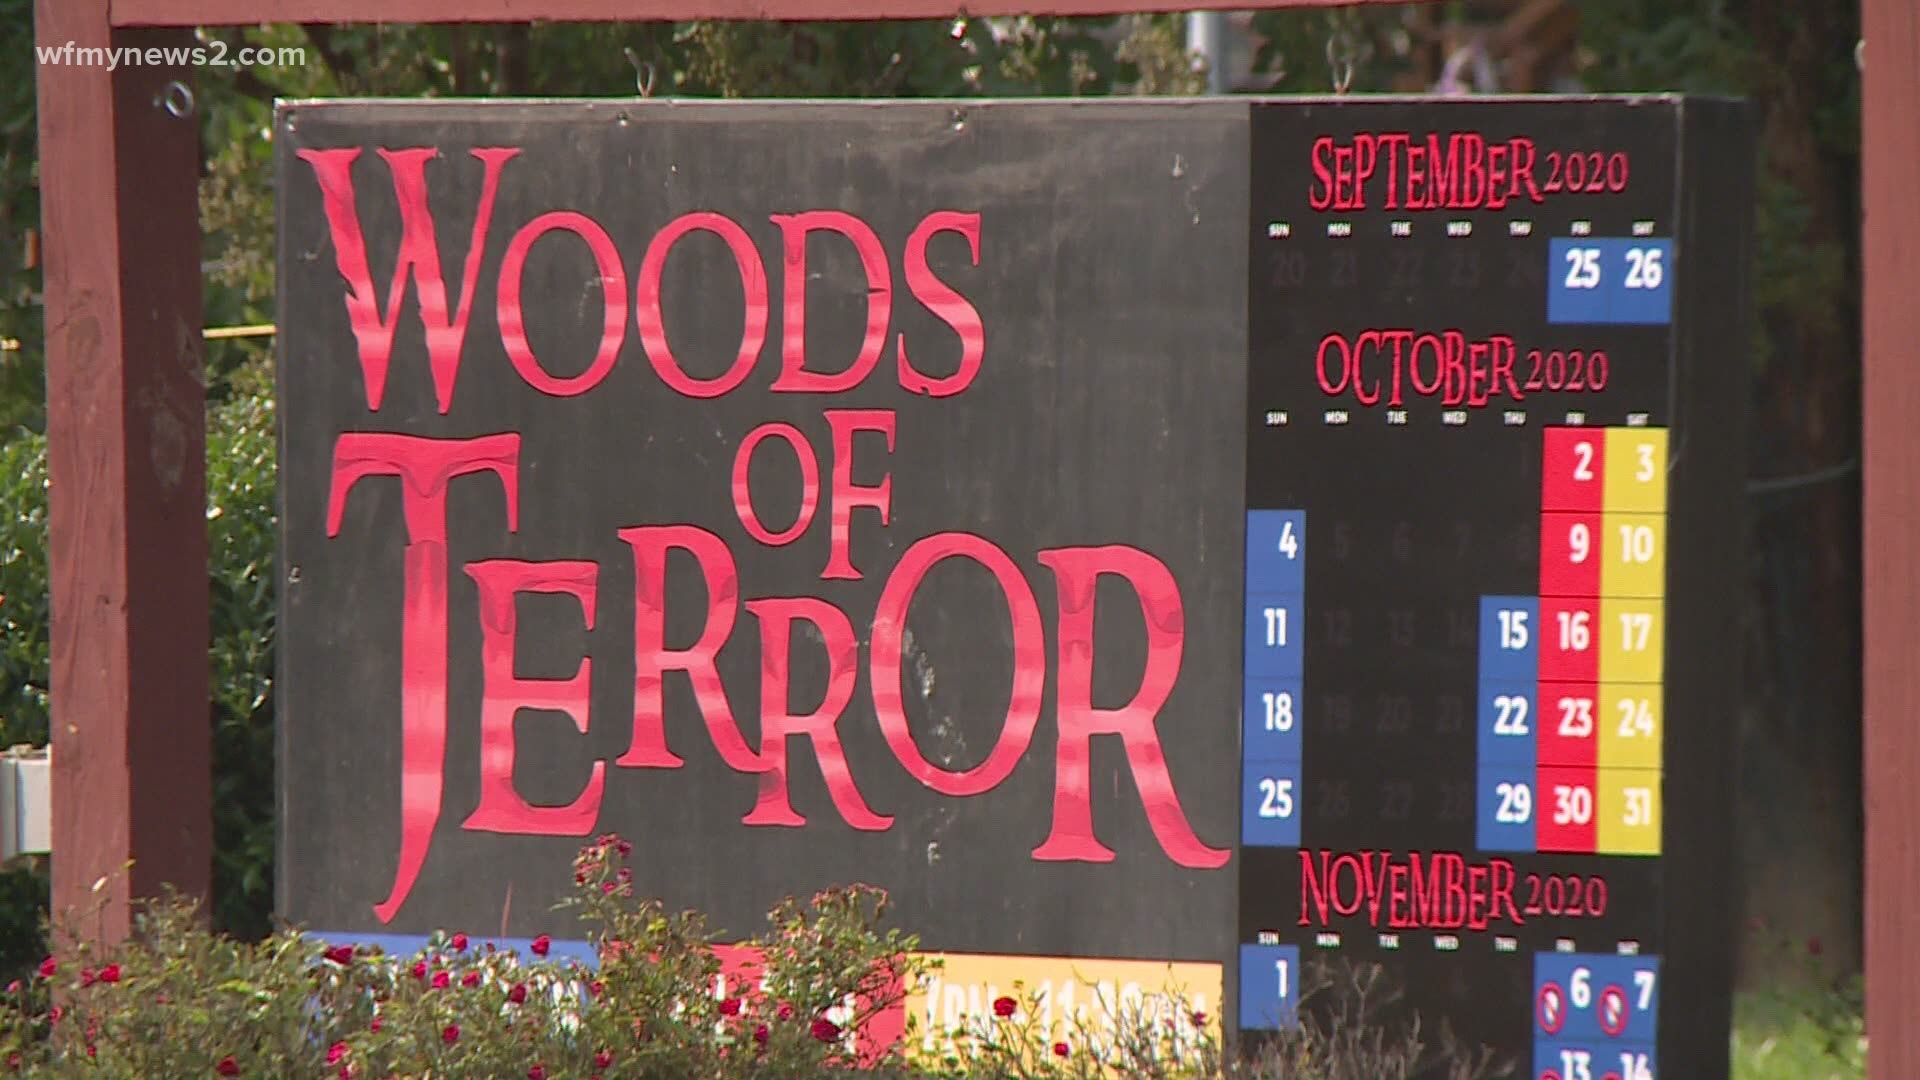 One woman started a petition calling on the owner of Woods of Terror to address the traffic problem with the Guilford County Sheriff's Office.